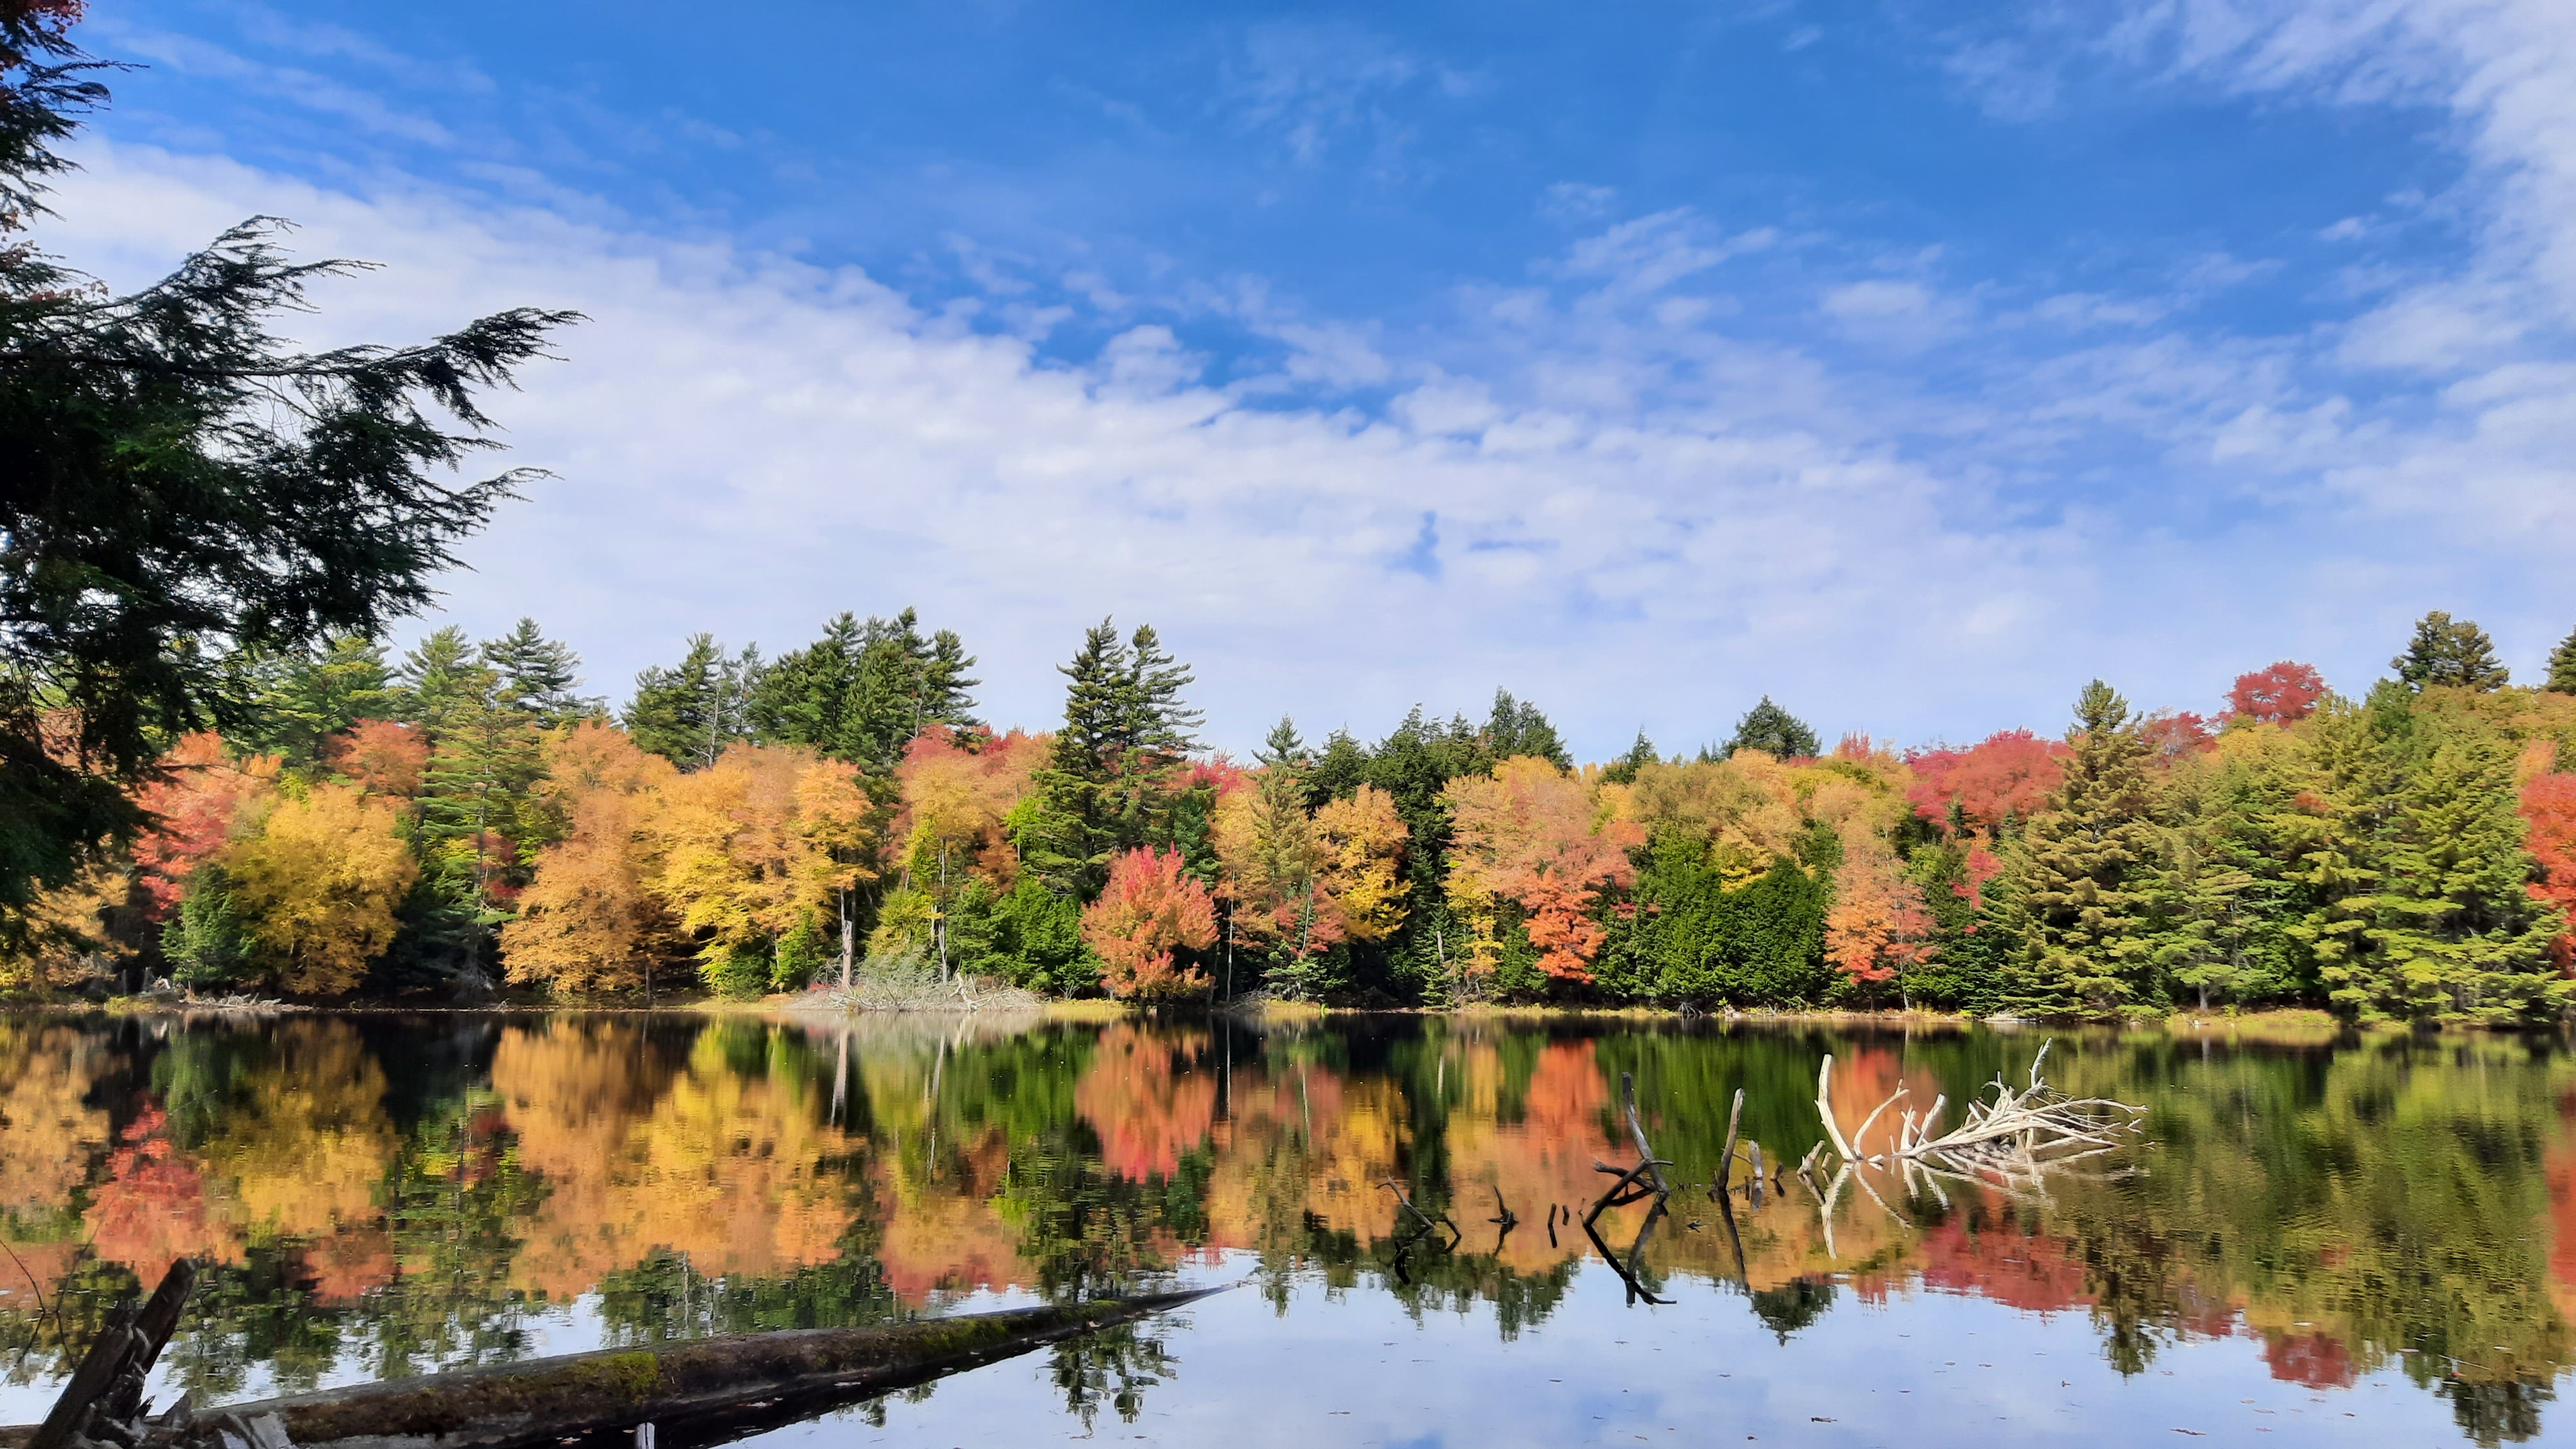 Fall foliage reflected in Church Pond near Paul Smiths in the Adirondacks